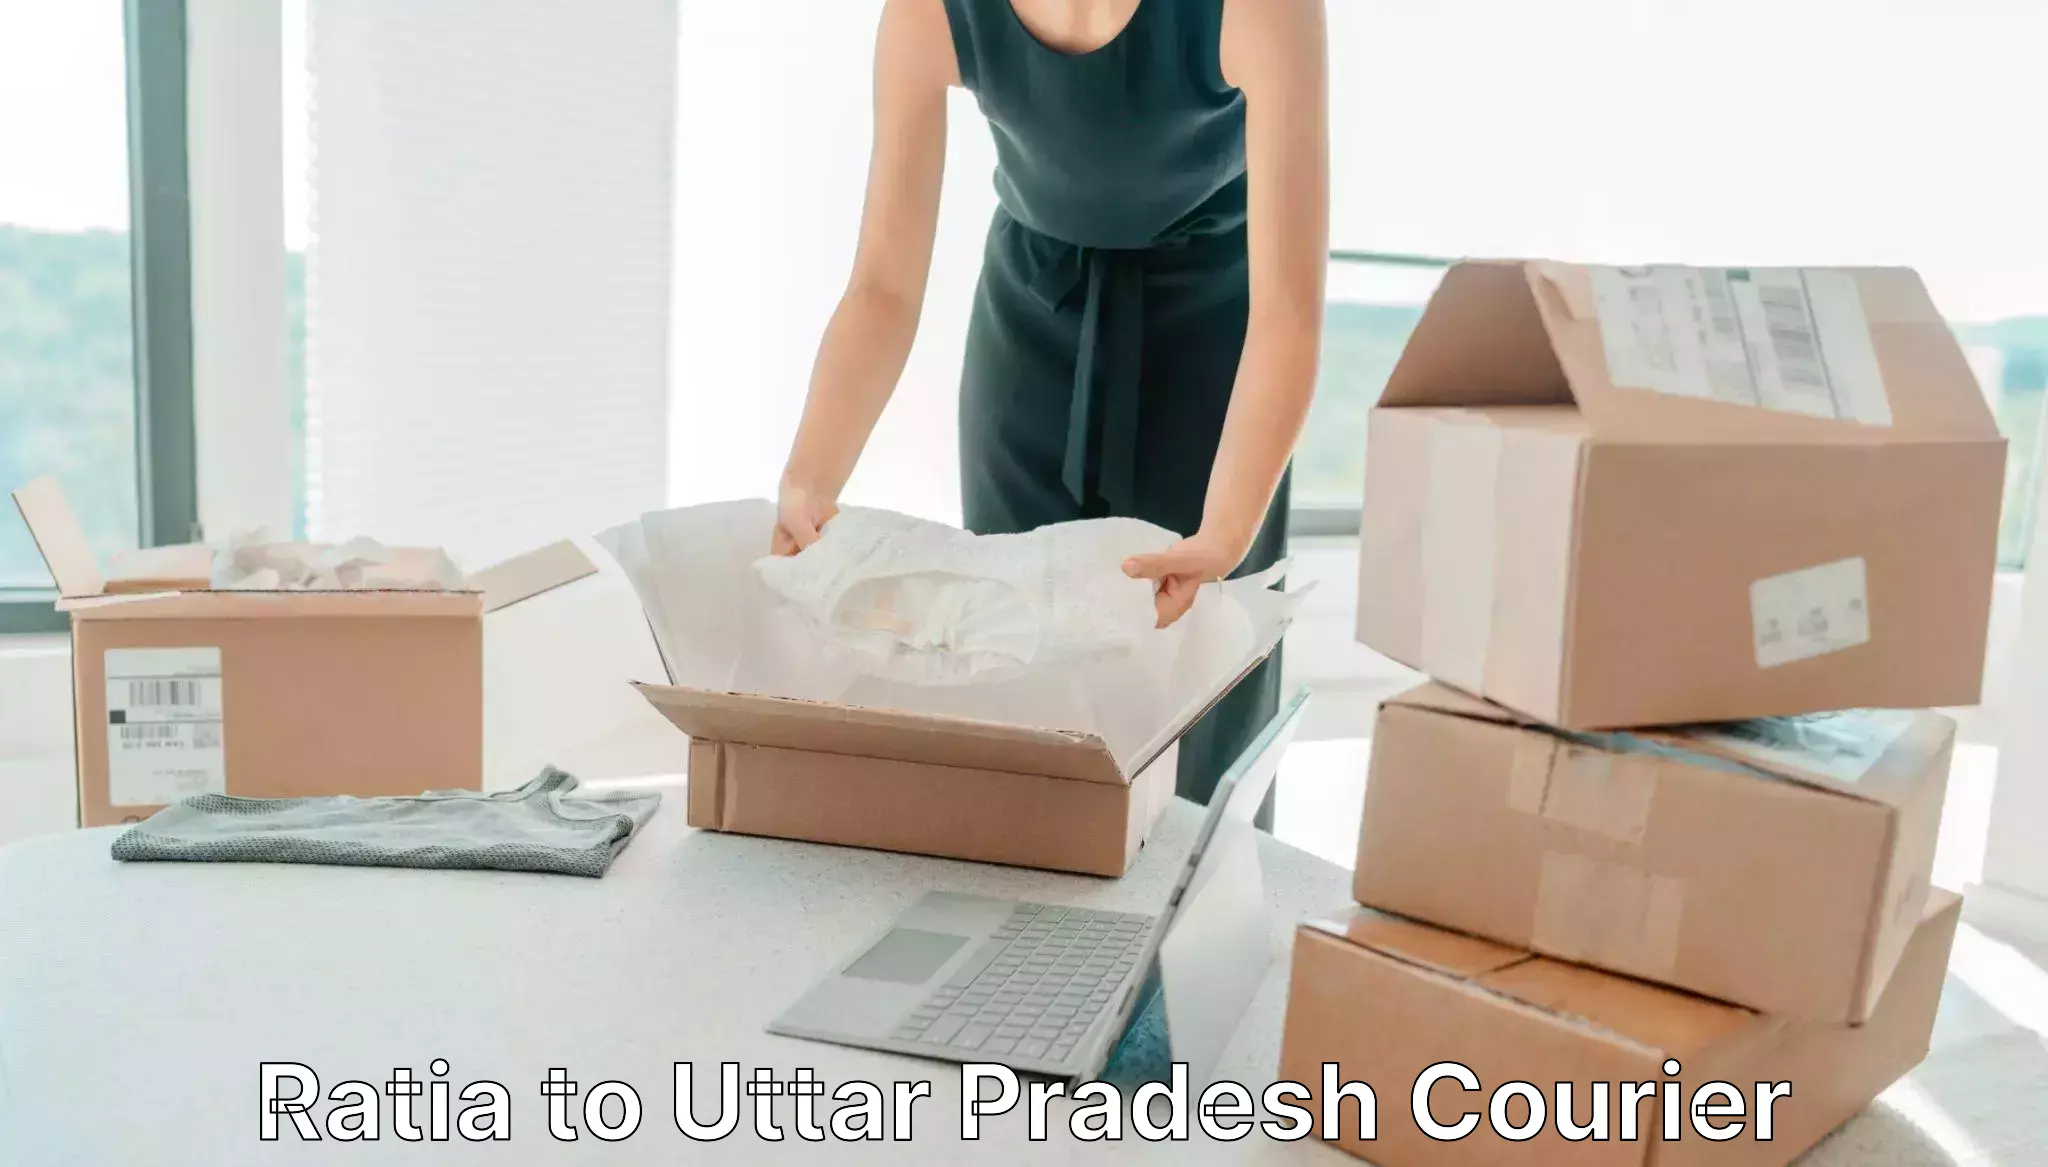 State-of-the-art courier technology Ratia to Sadat